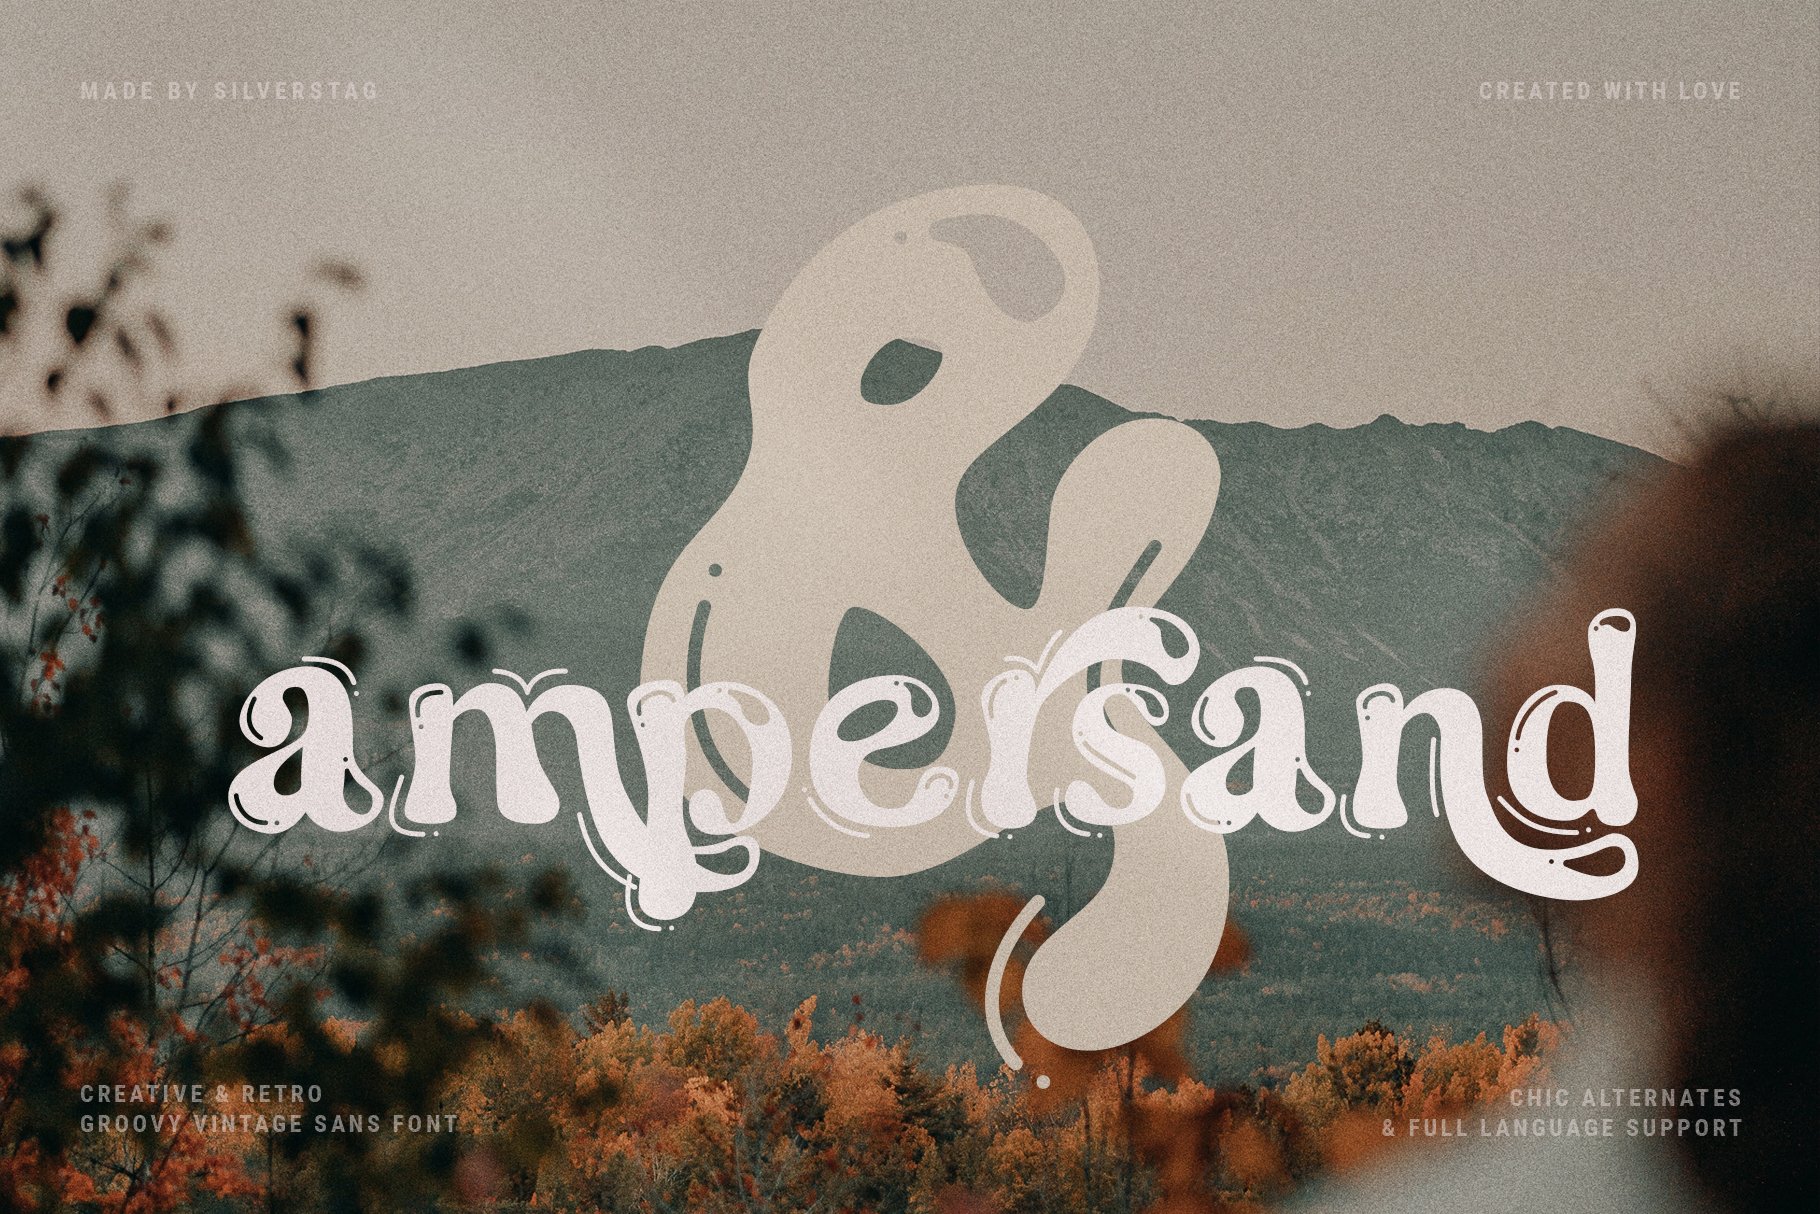 08 stone and hikers groovy retro font by silver stag 713